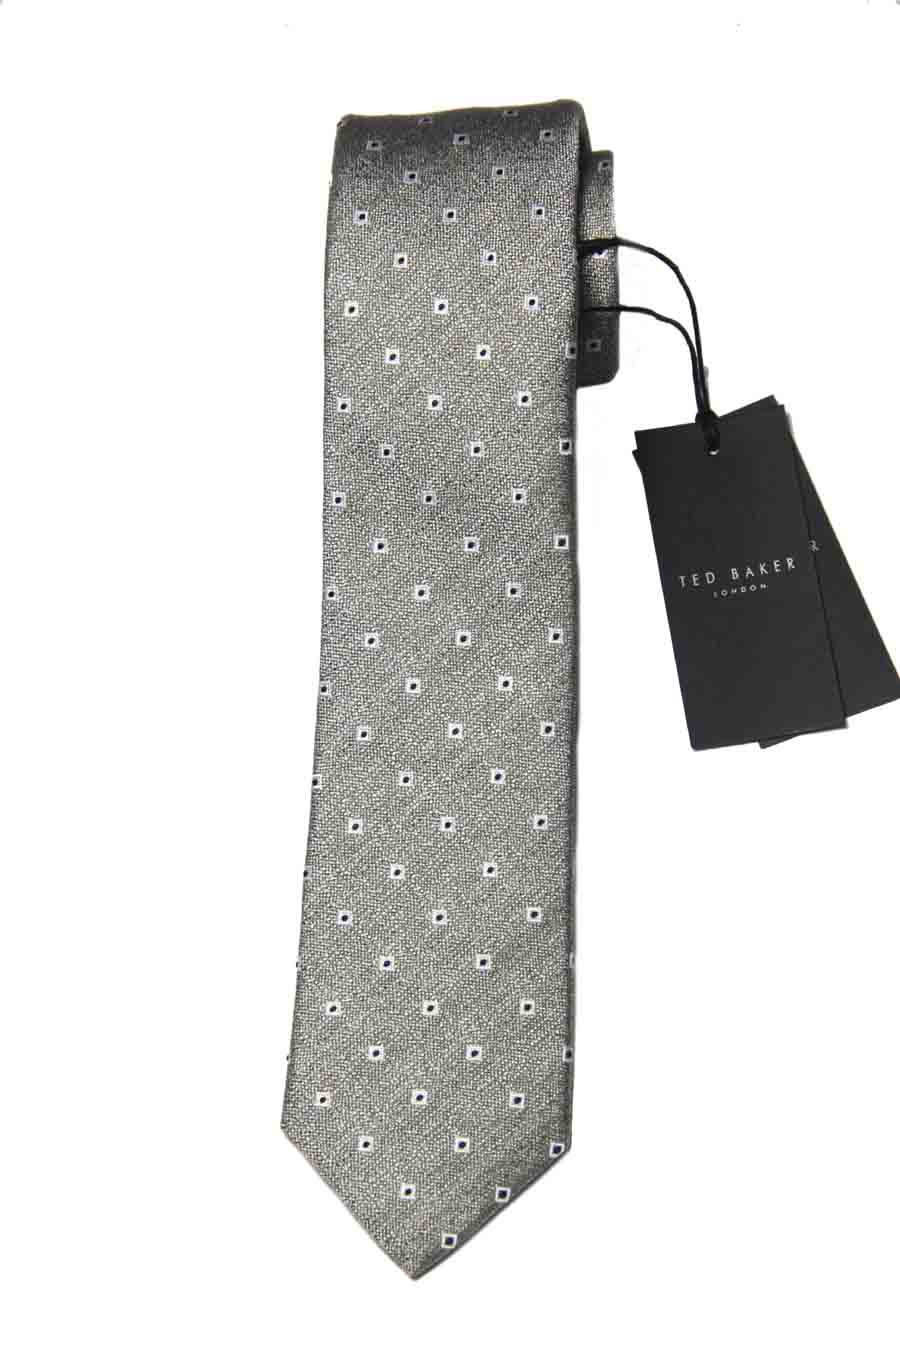 Ted Baker Silk and Cotton Tie Green Geo Pattern Men's